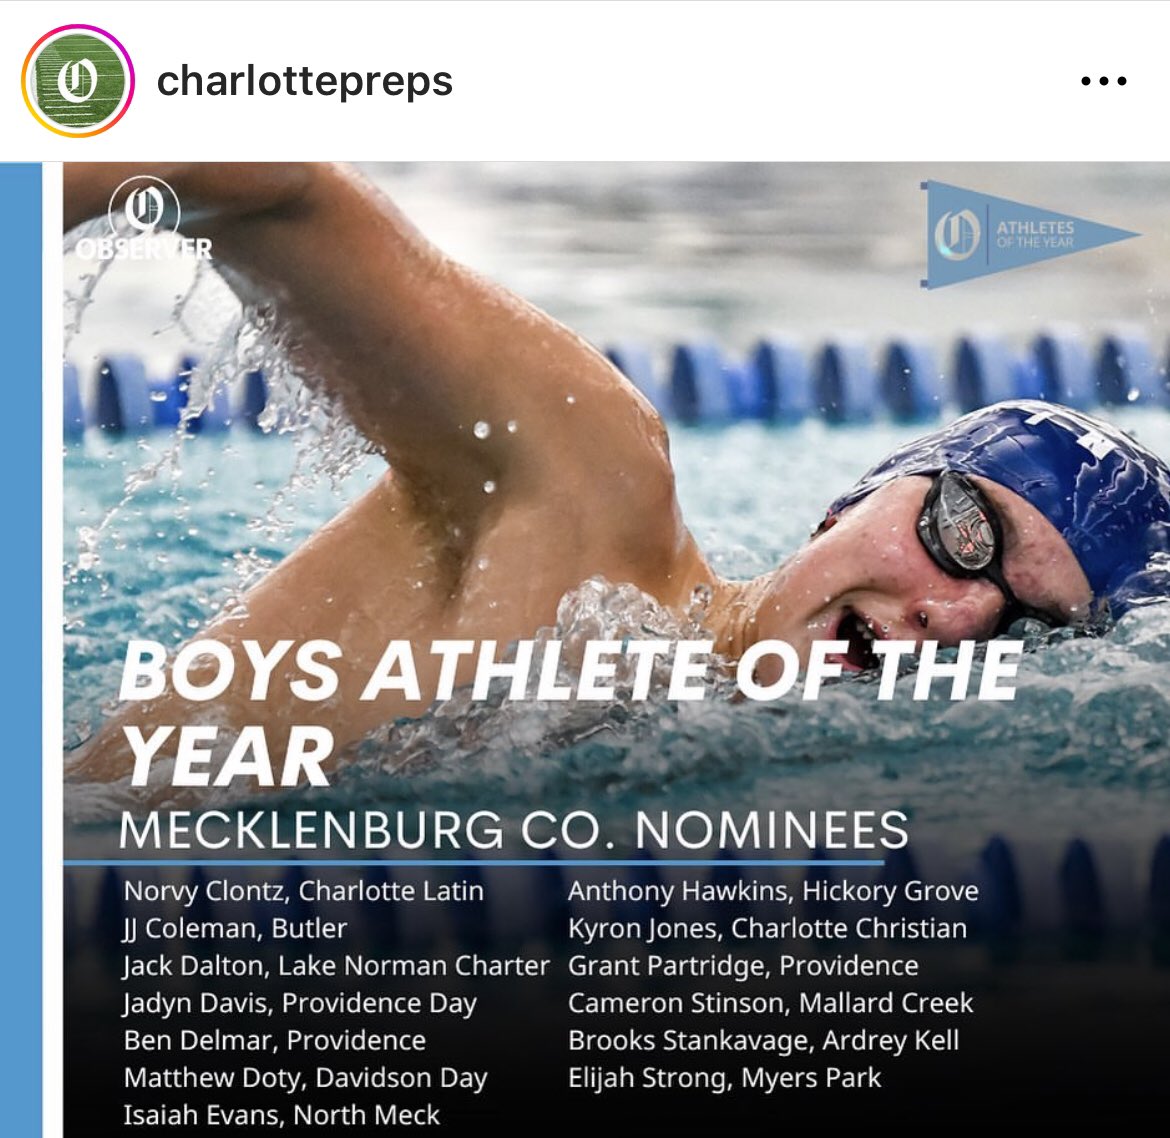 What an honor to be nominated @charlottepreps “Athlete of the Year”! If you have a chance please vote at link shorturl.at/vCHV5 often. Voting ends tomorrow (Sunday). Thanks. @GeorgiaFootball @BrooksAustinBA @charchristfb @charchristtrack @CharChristAD @charchristiannc